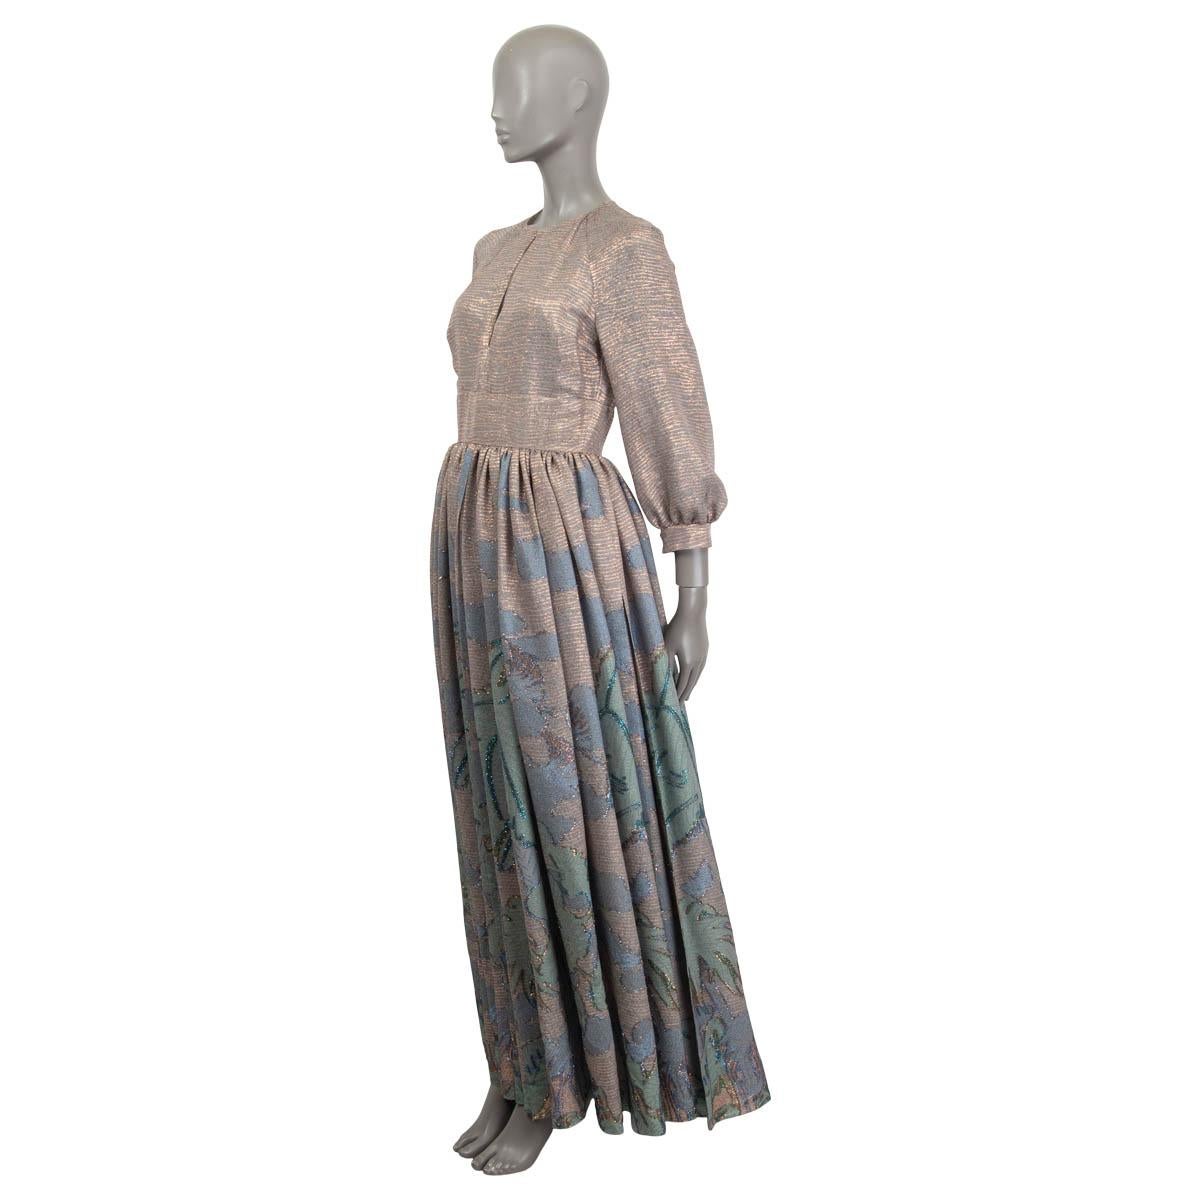 100% authentic Christian Dior Resort 2020 keyhole lurex maxi dress in copper, green and blue silk (66%) and polyester (34%). Features long raglan sleeves (sleeve measurements taken from the neck) and buttoned cuffs. Opens with a hook and a concealed